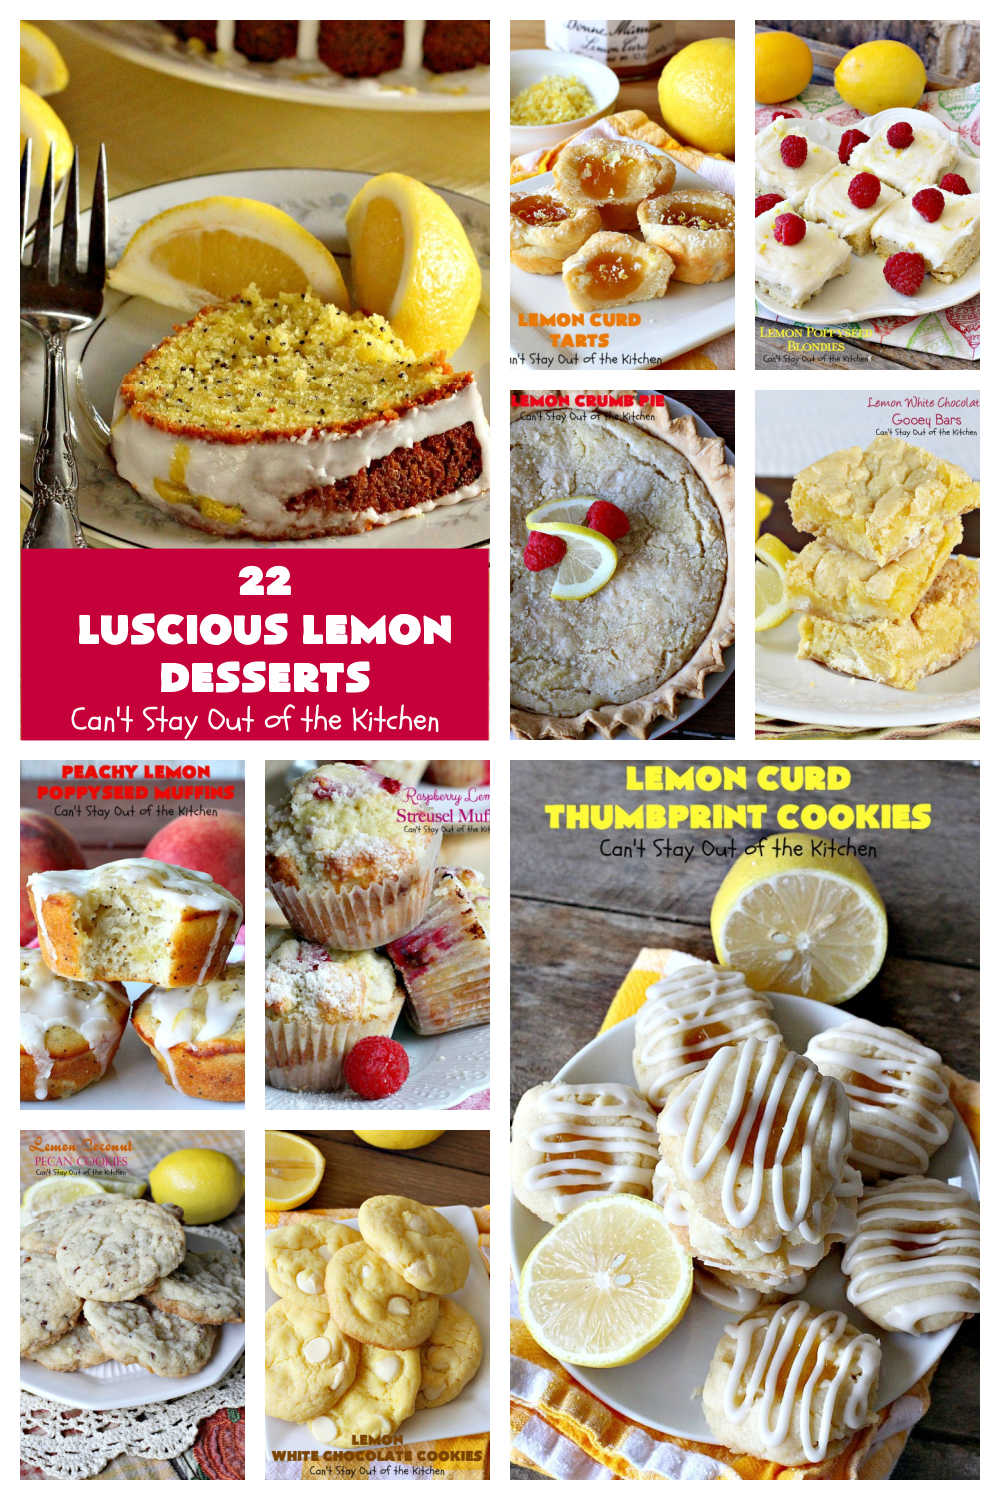 22 Luscious Lemon Desserts | Can't Stay Out of the Kitchen | 22 fabulous #lemon flavored #desserts & #muffin #recipes. Includes #pies, #cakes, #cookies & #blondies. If you have a lemon sweet tooth, these terrific desserts are for you!